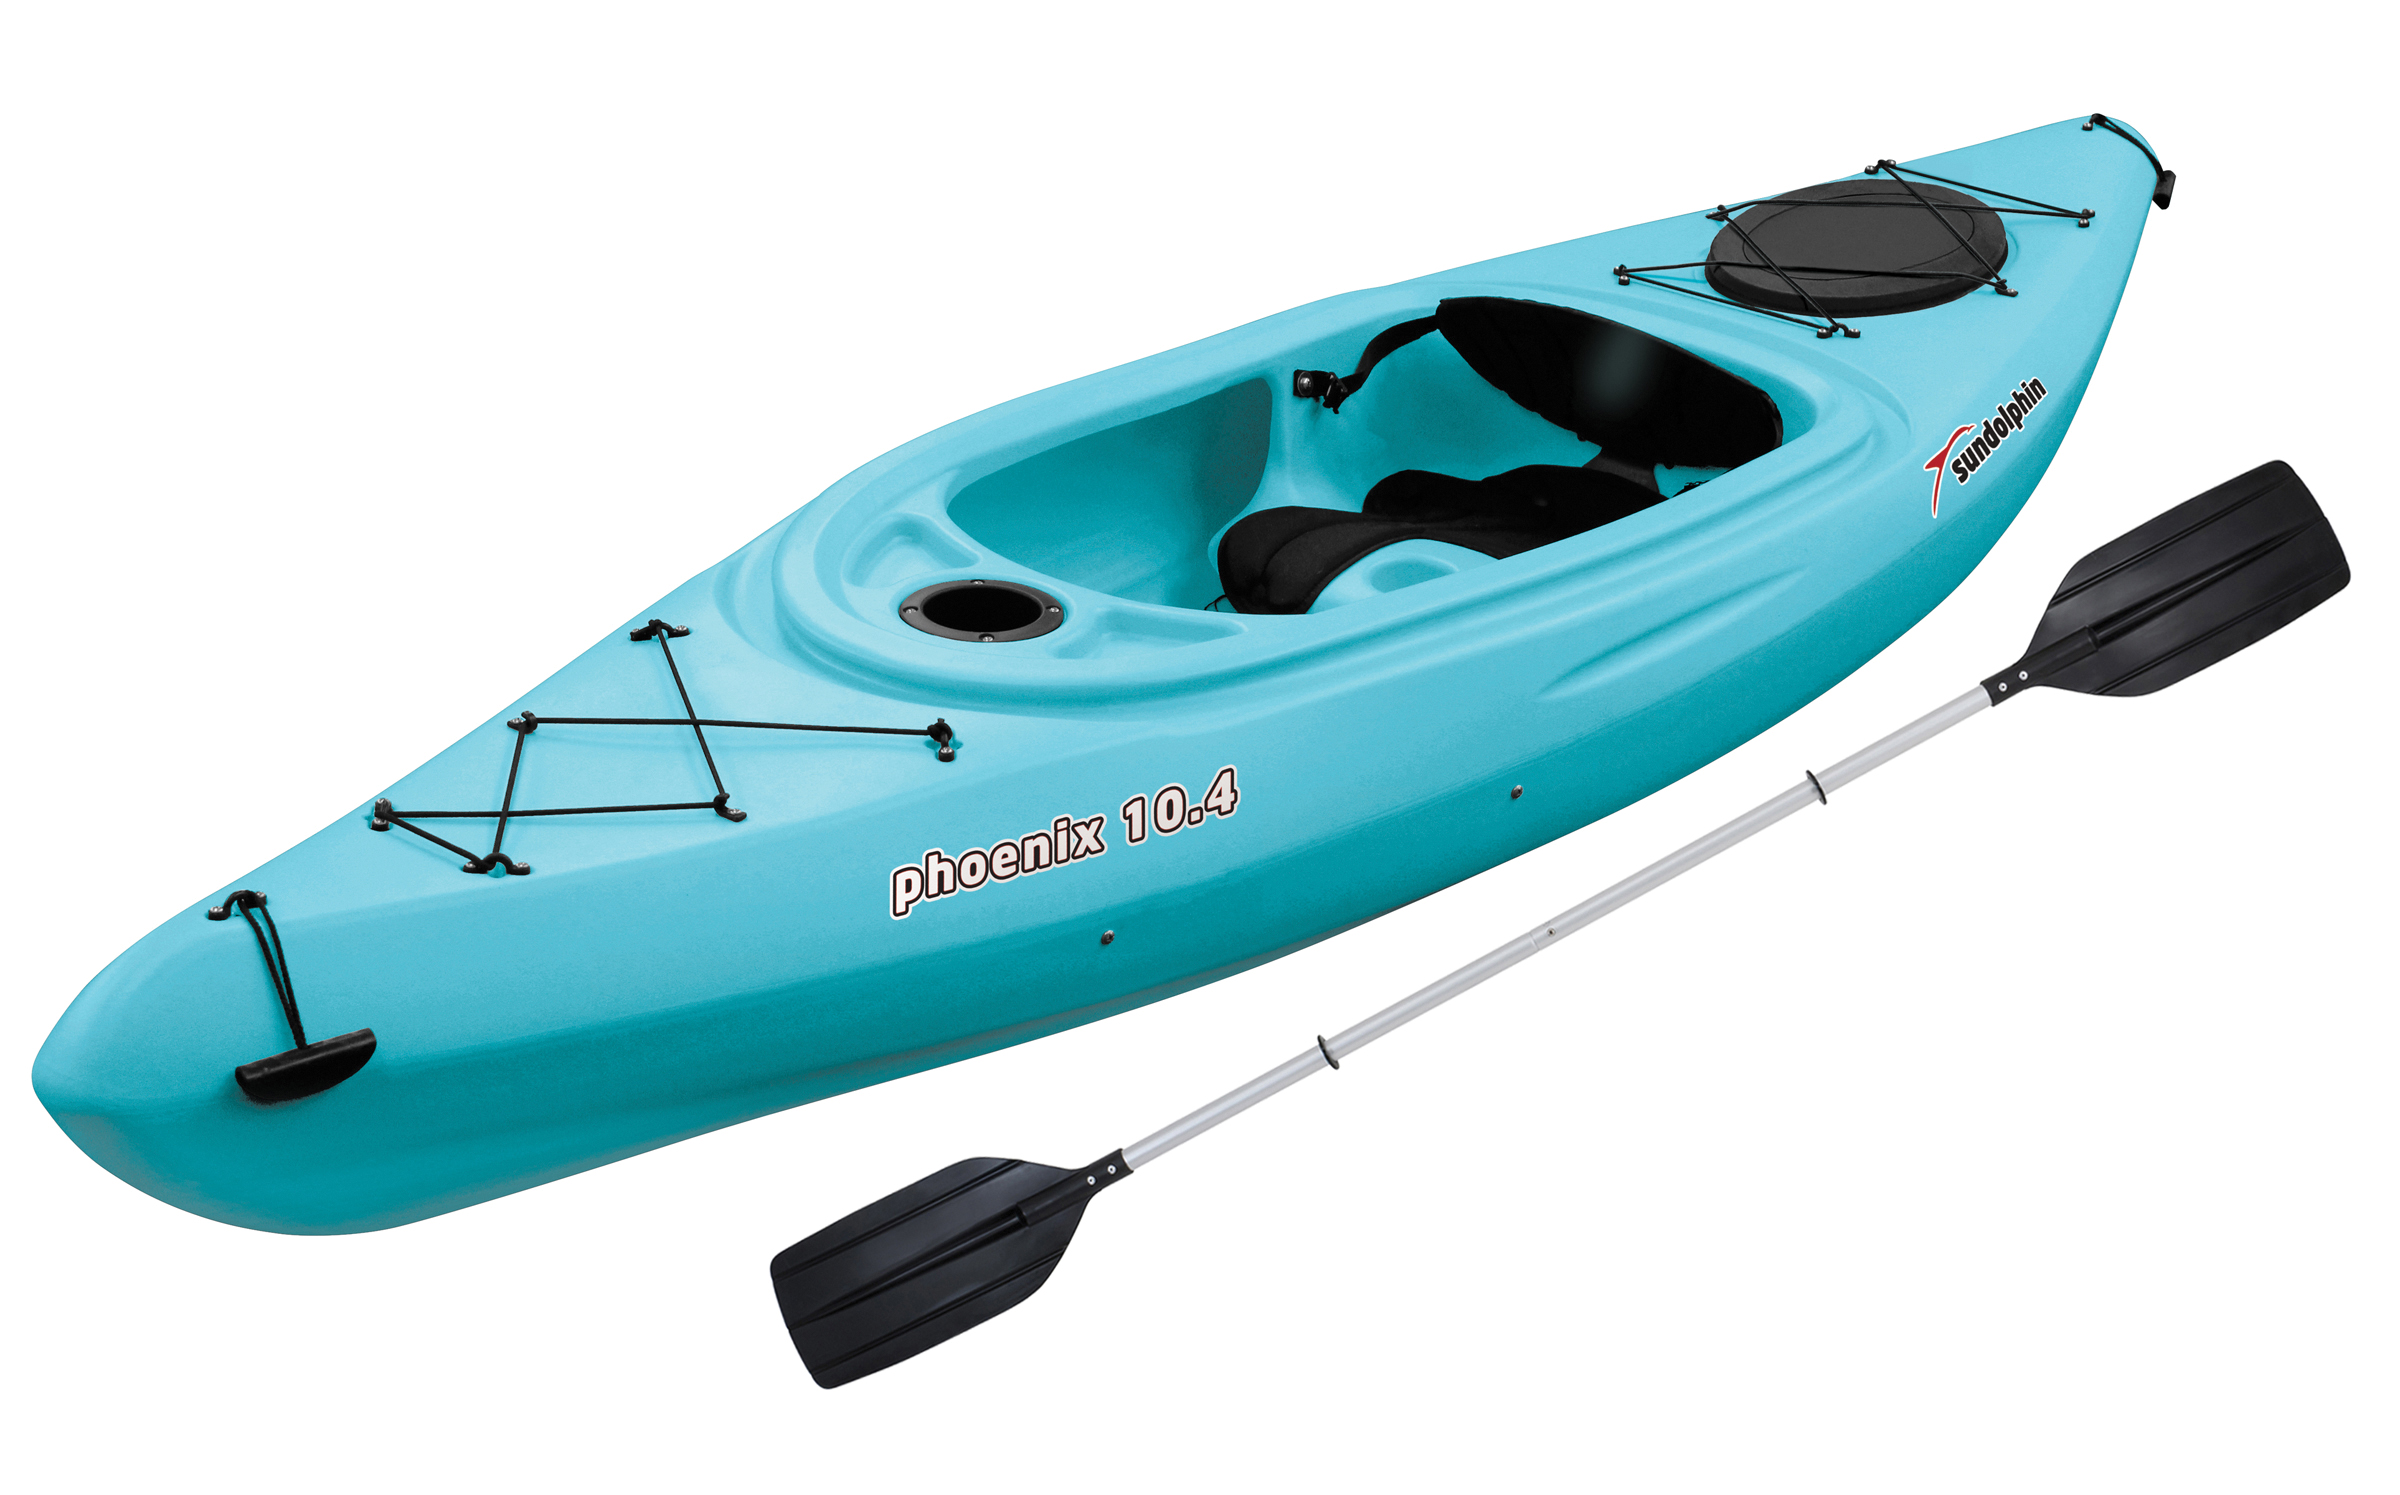 Sun Dolphin Phoenix 10.4 Sit-In Kayak with Paddle